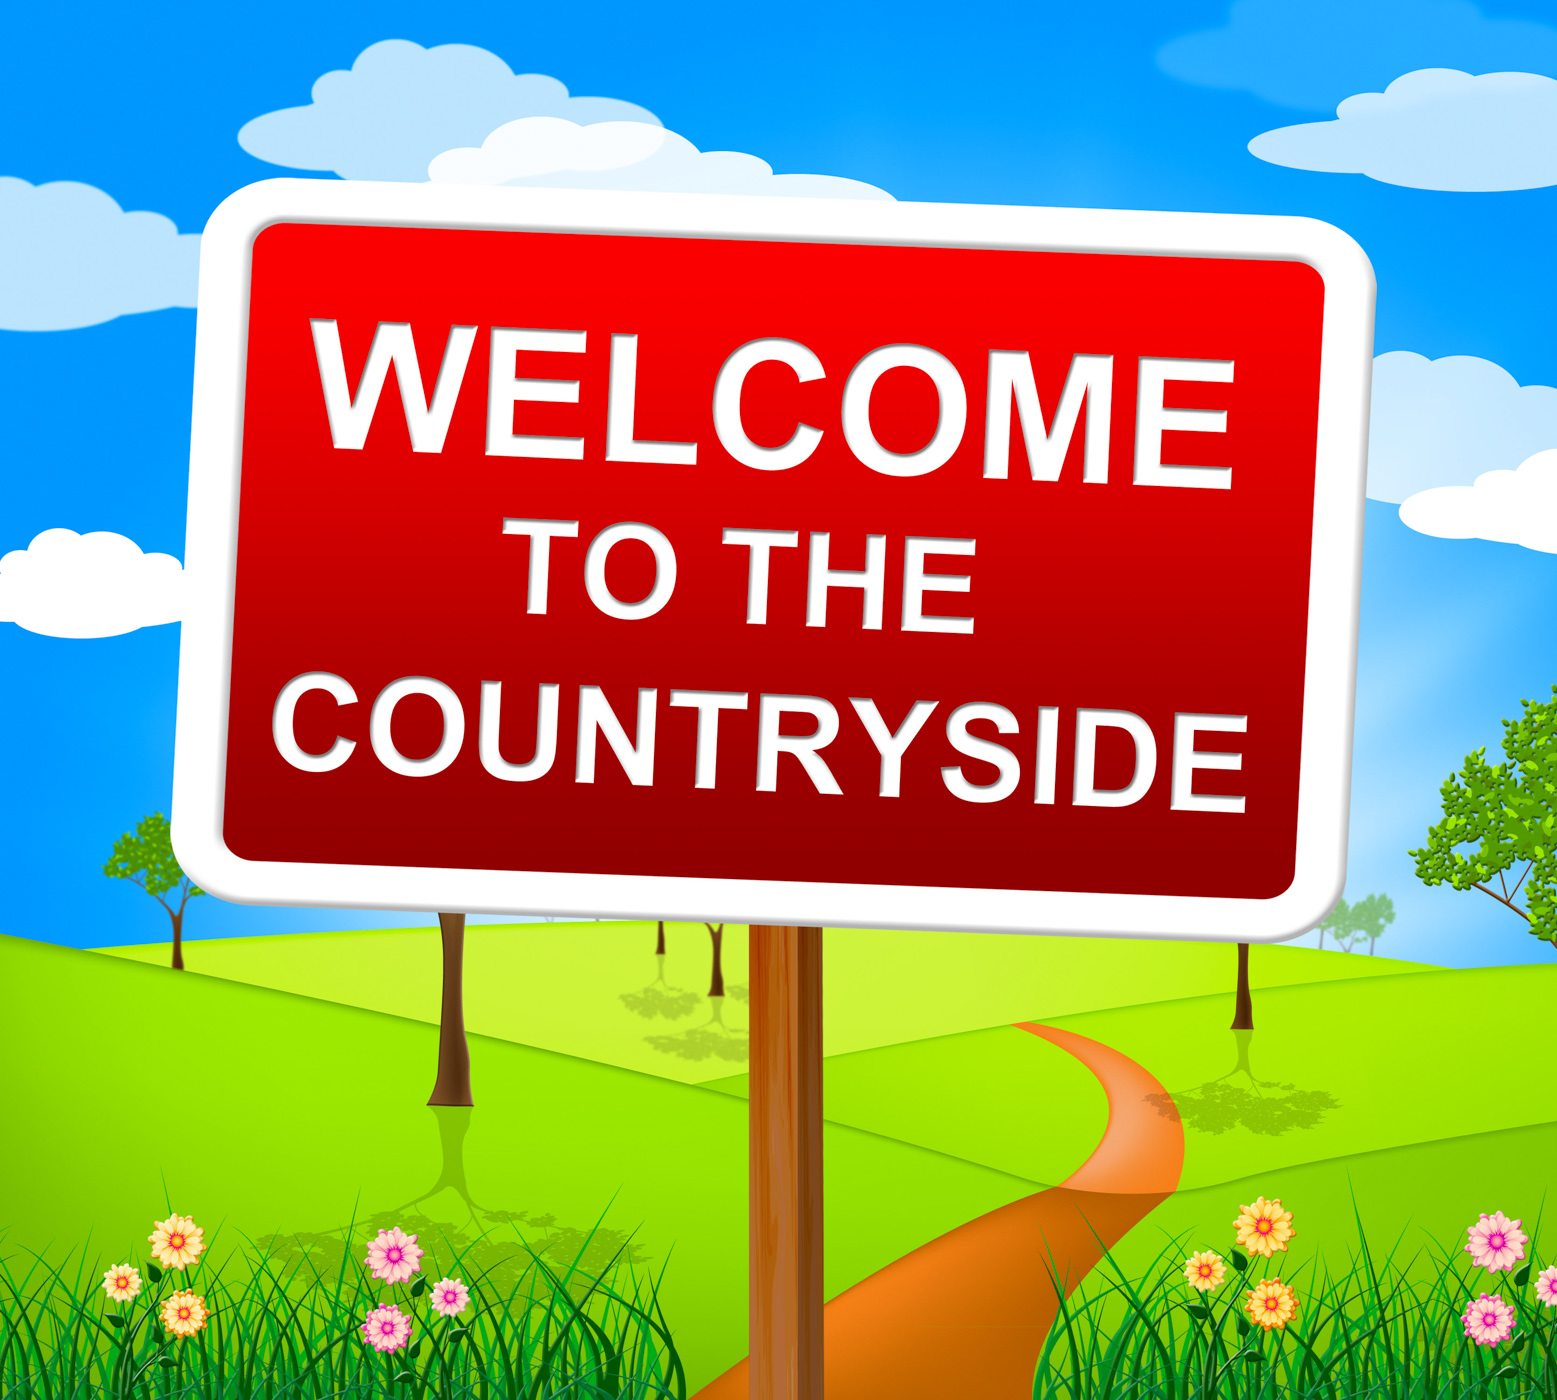 Welcome to countryside. Welcoming meaning